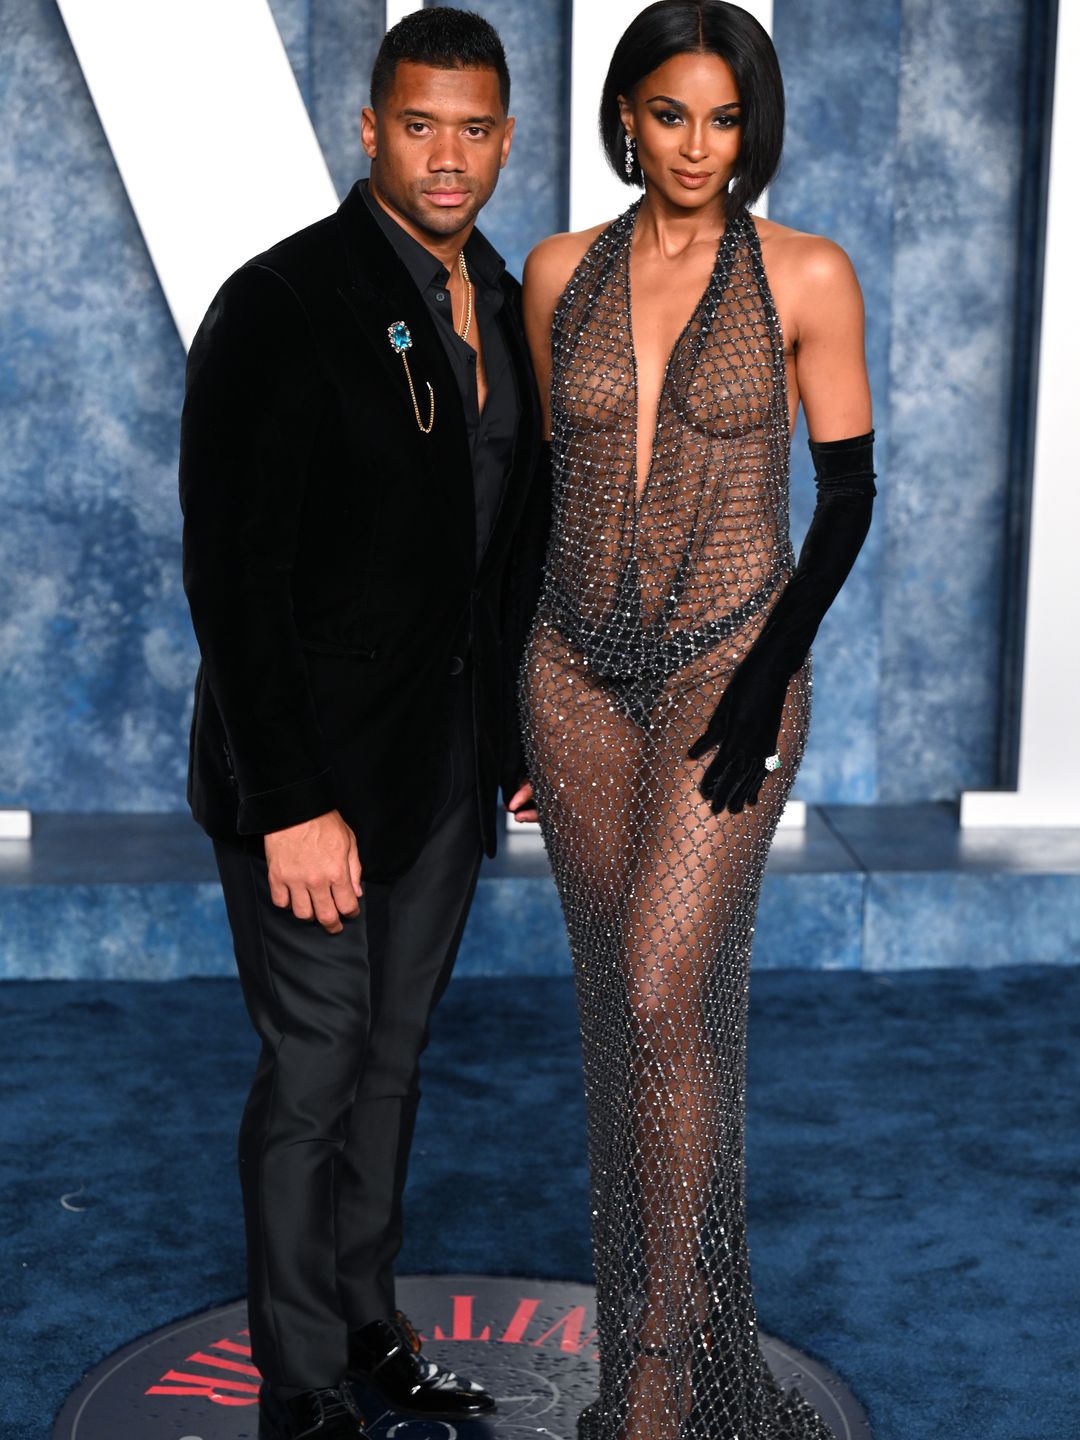 Ciara and Russell posing for photos on the Oscars afterparty red carpet